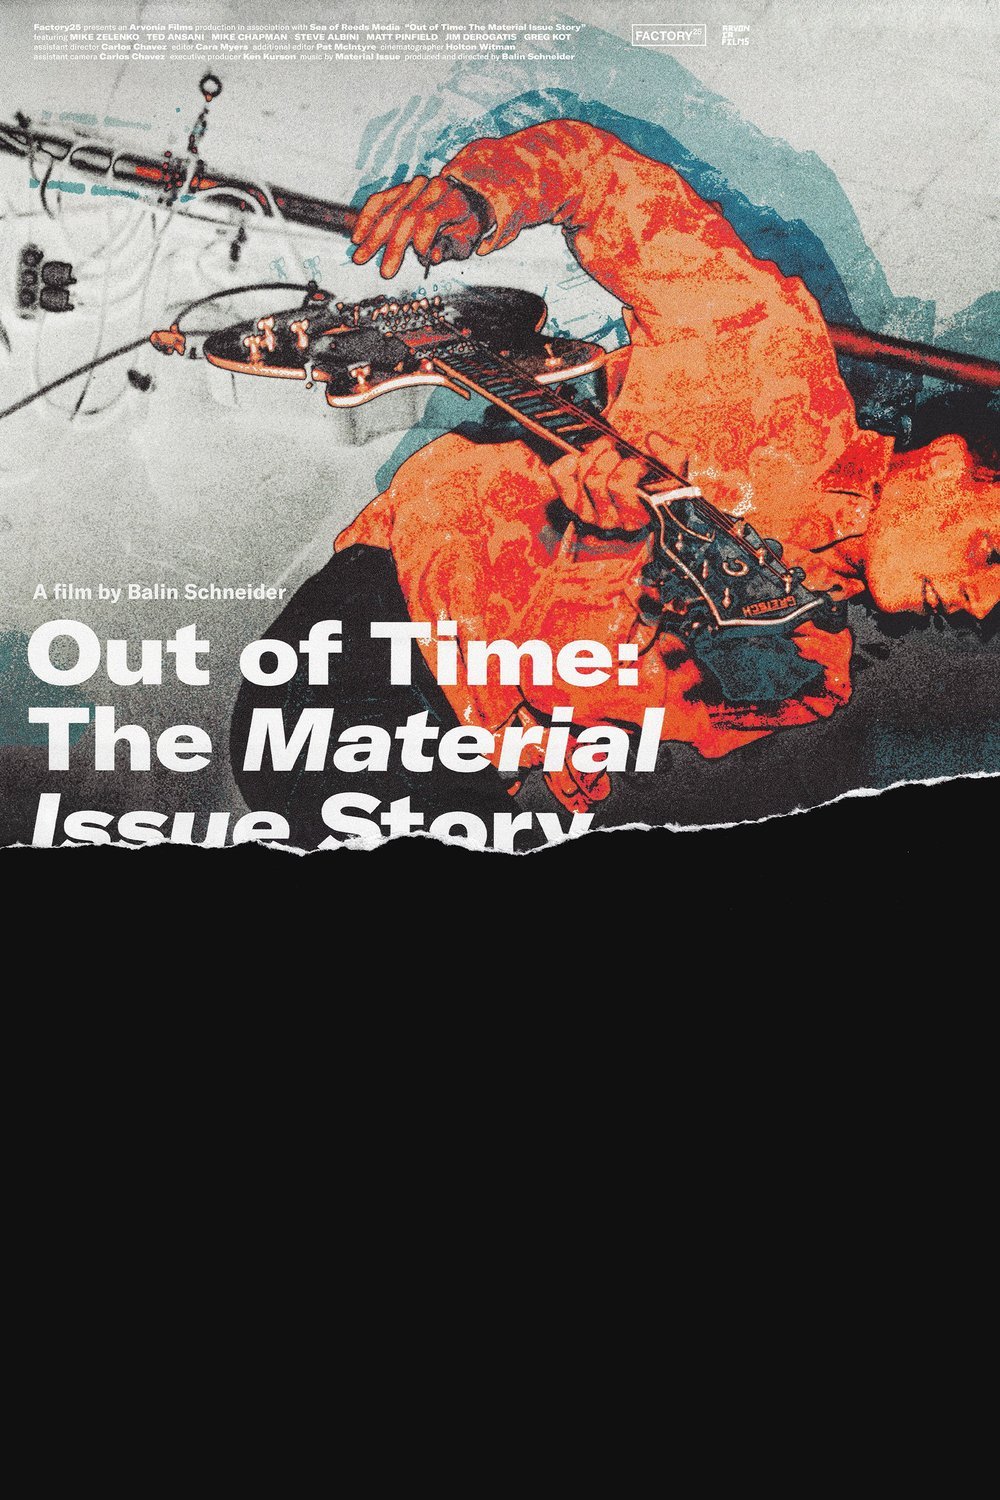 Poster of the movie Out of Time: The Material Issue Story